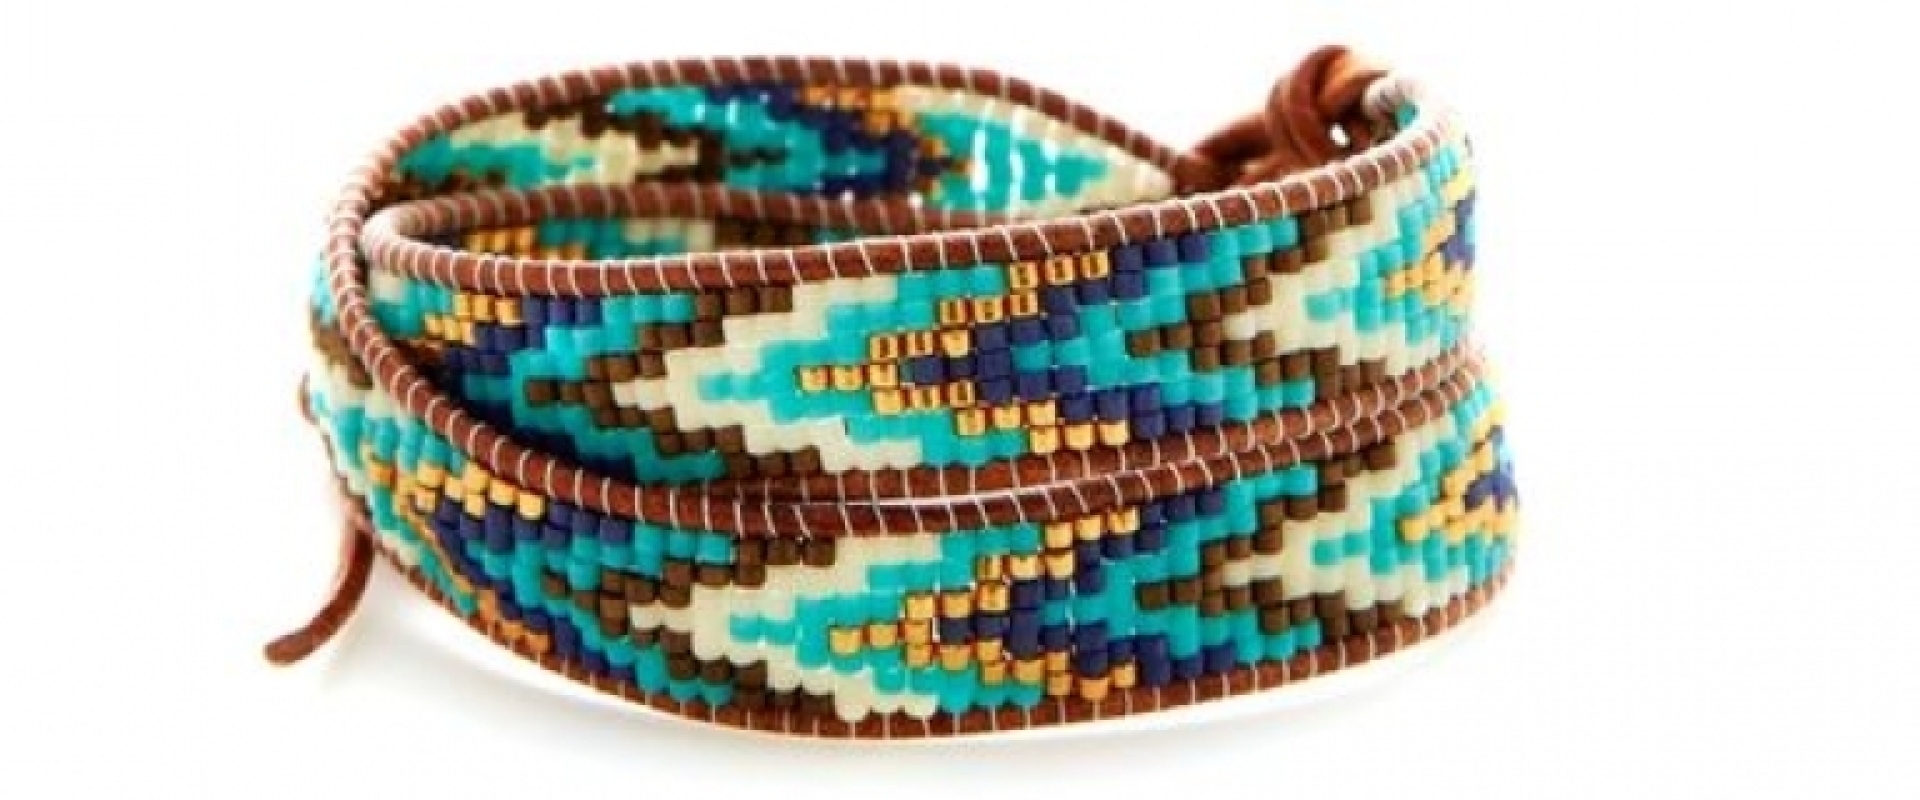 Normal patterns  Loom beading Loom jewelry Beading patterns